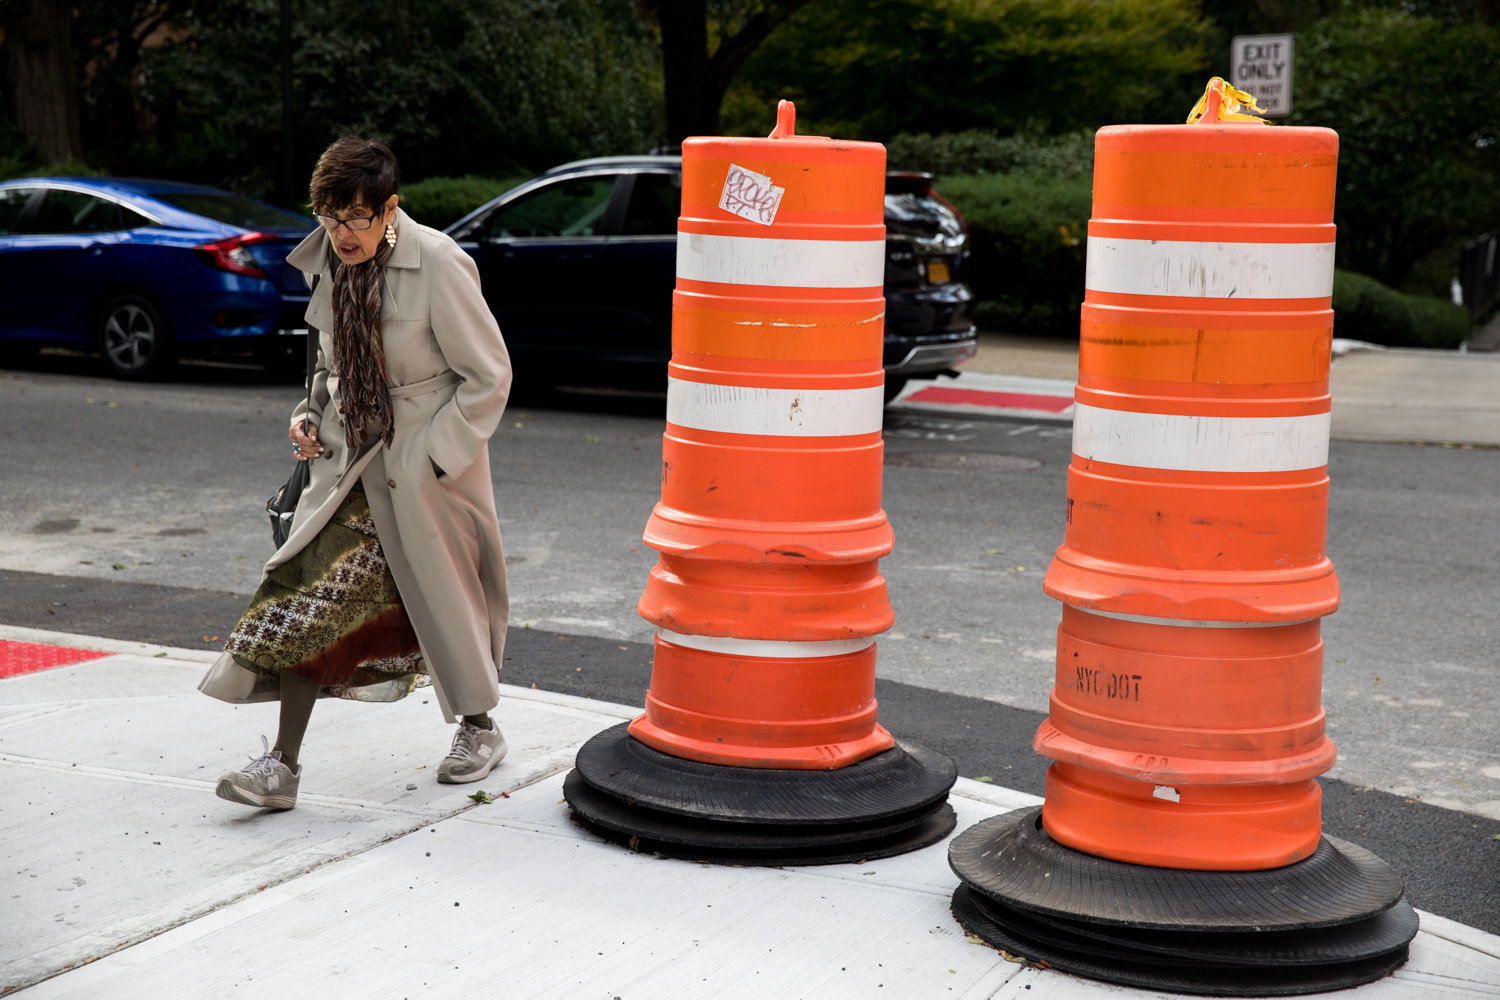 A pedestrian walks onto Kappock Street after crossing Palisade Avenue. The transportation department is extending curbs at intersections like this to narrow crosswalks.